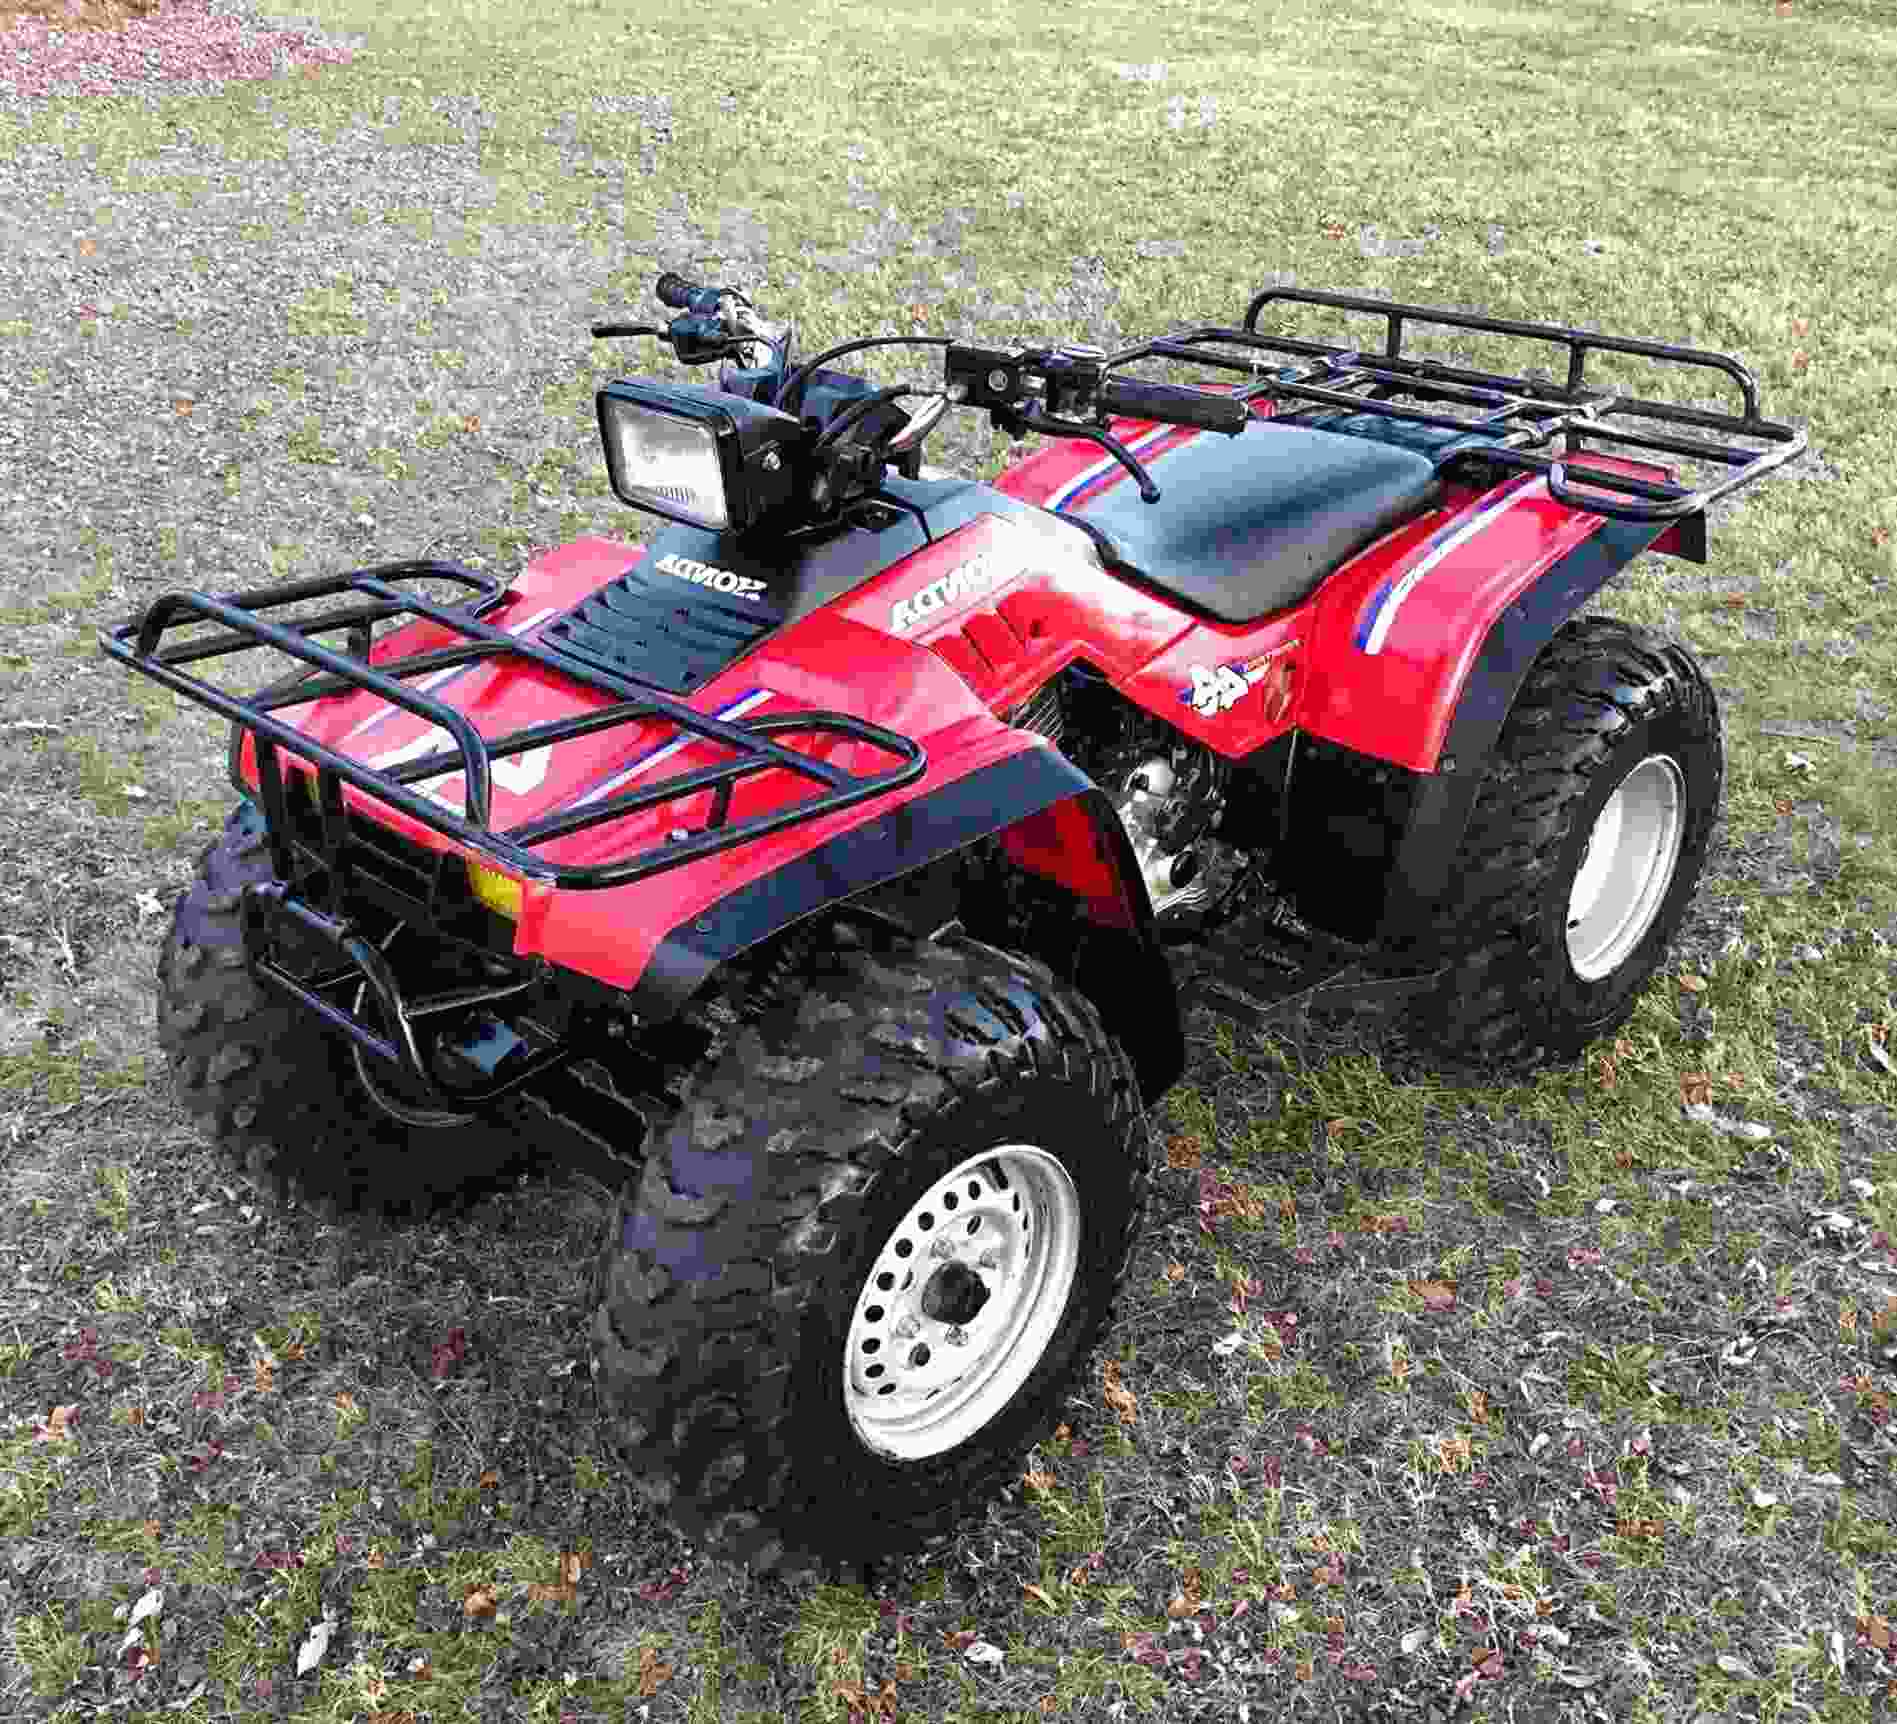 Honda Fourtrax 350 for sale in UK View 60 bargains